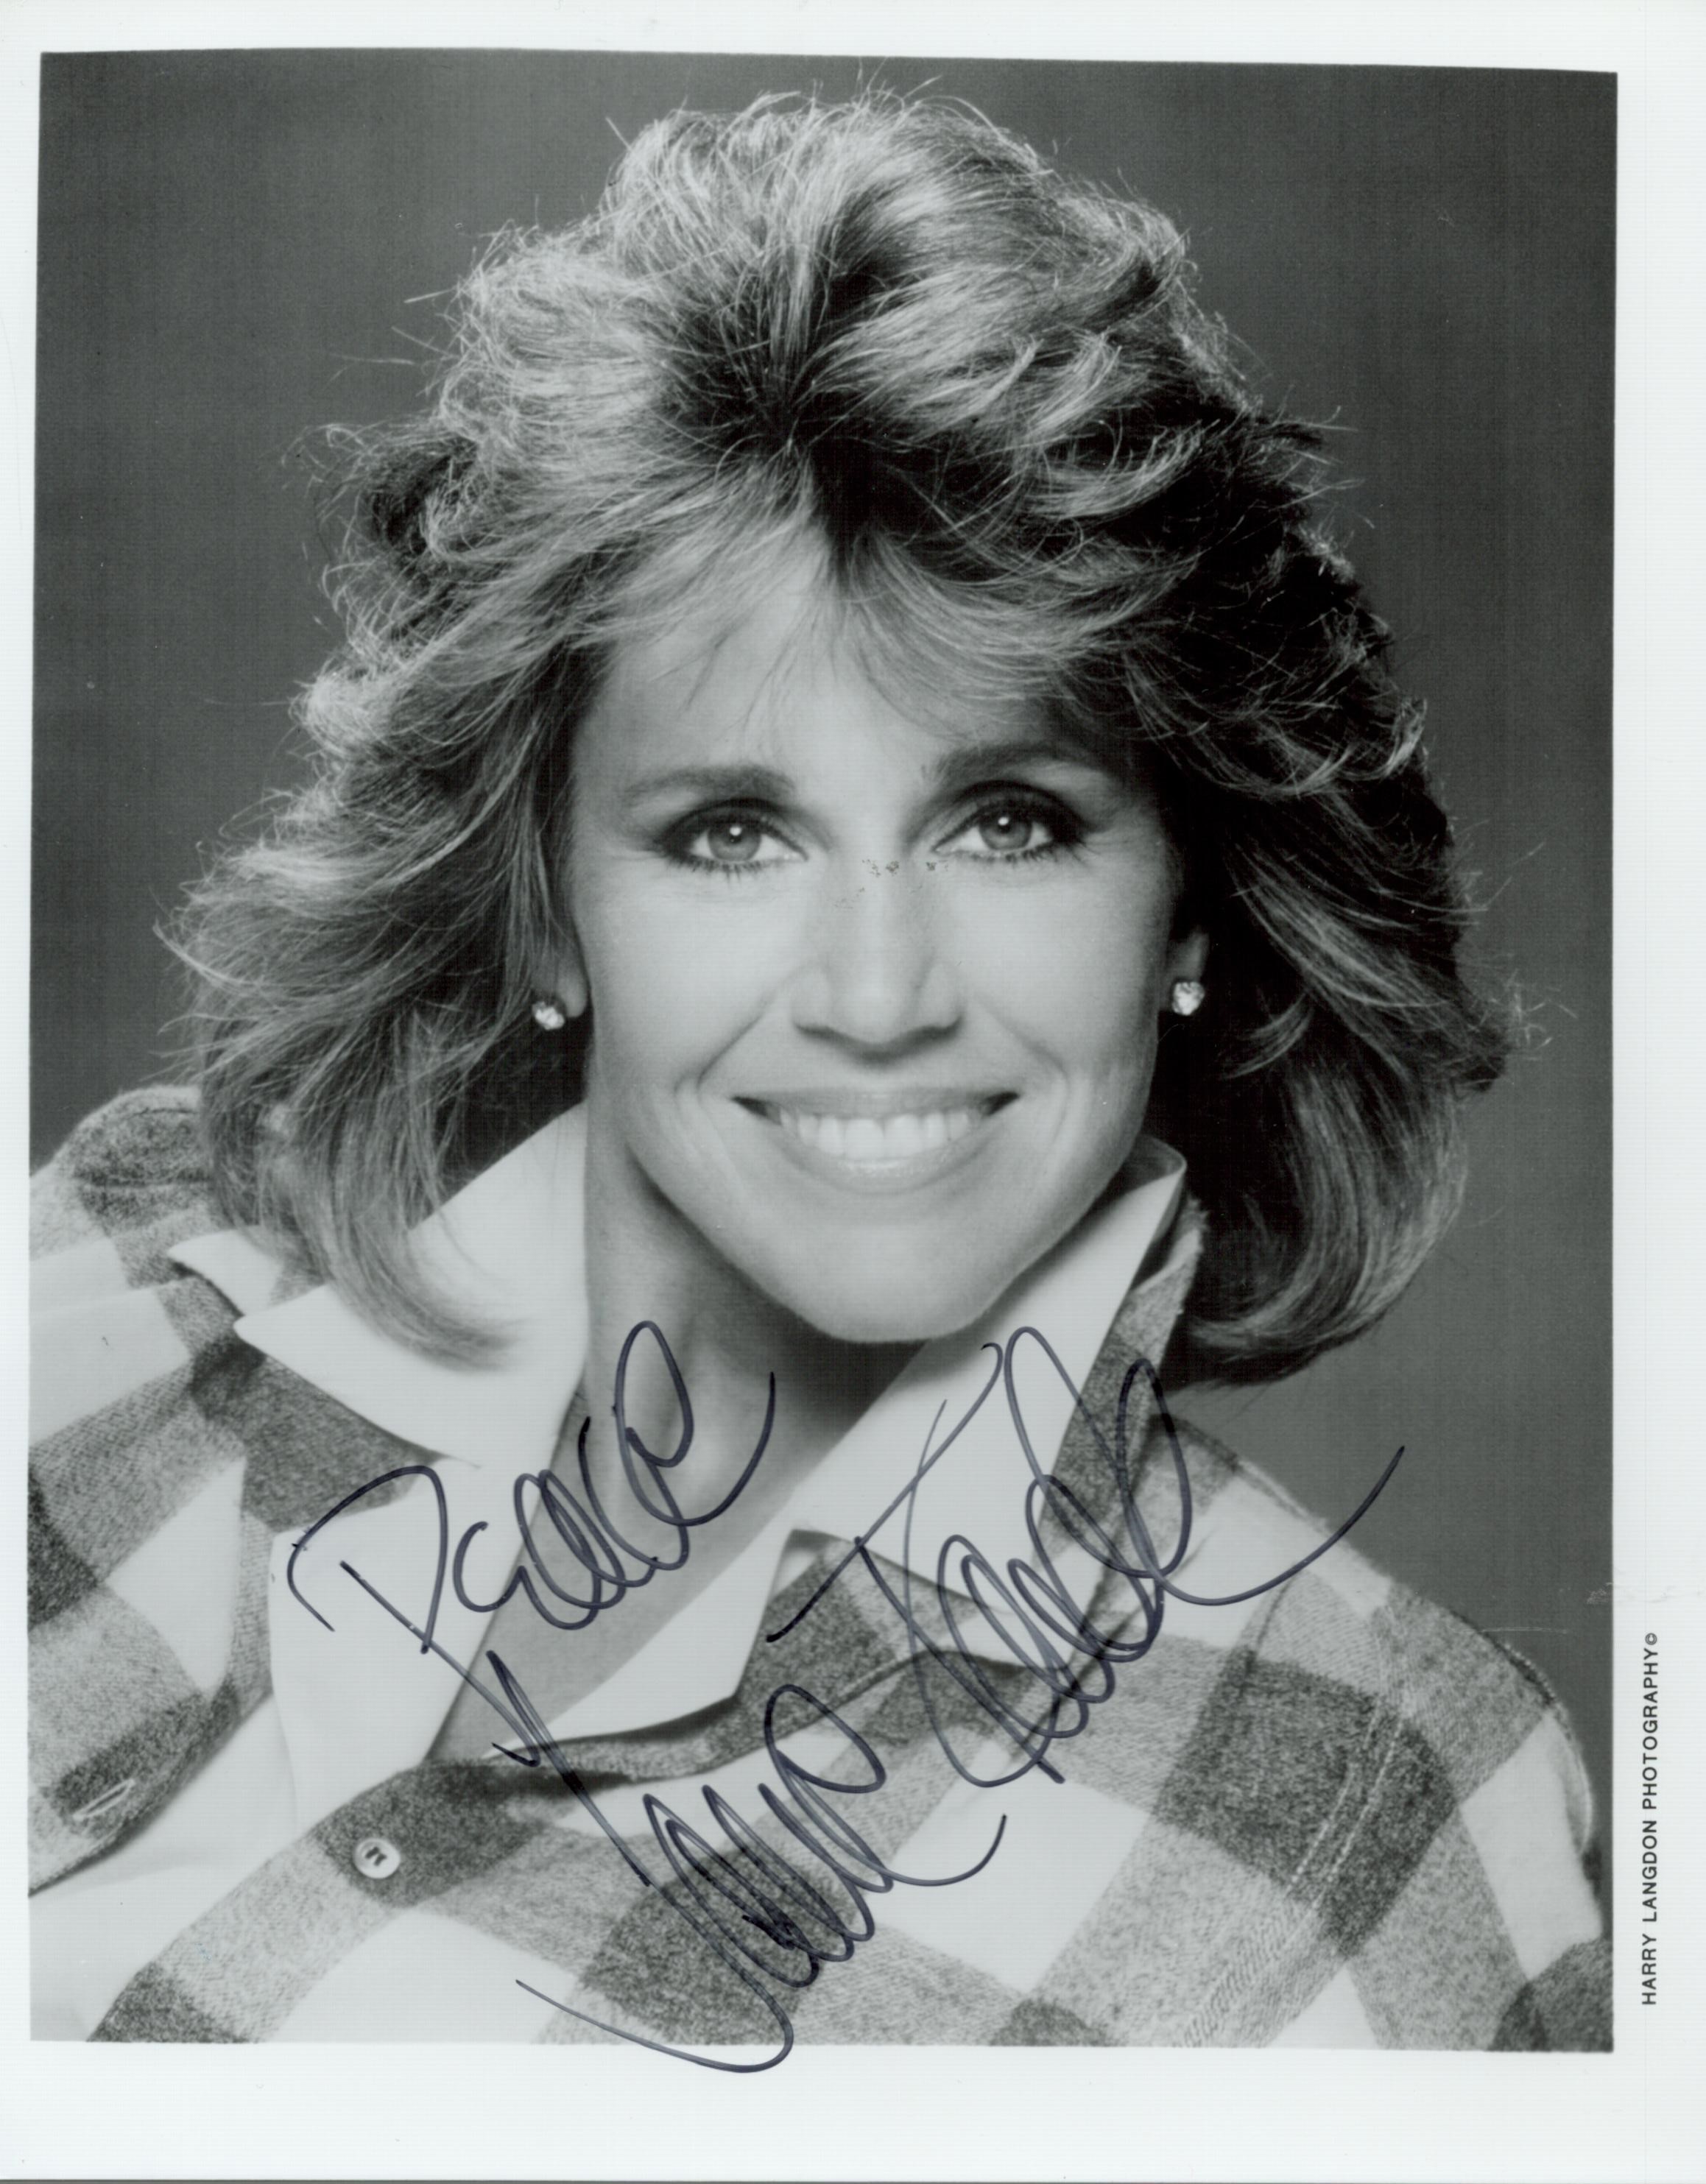 Jane Fonda signed 10x8 black and white photo. Fonda is an American actress, activist, and former